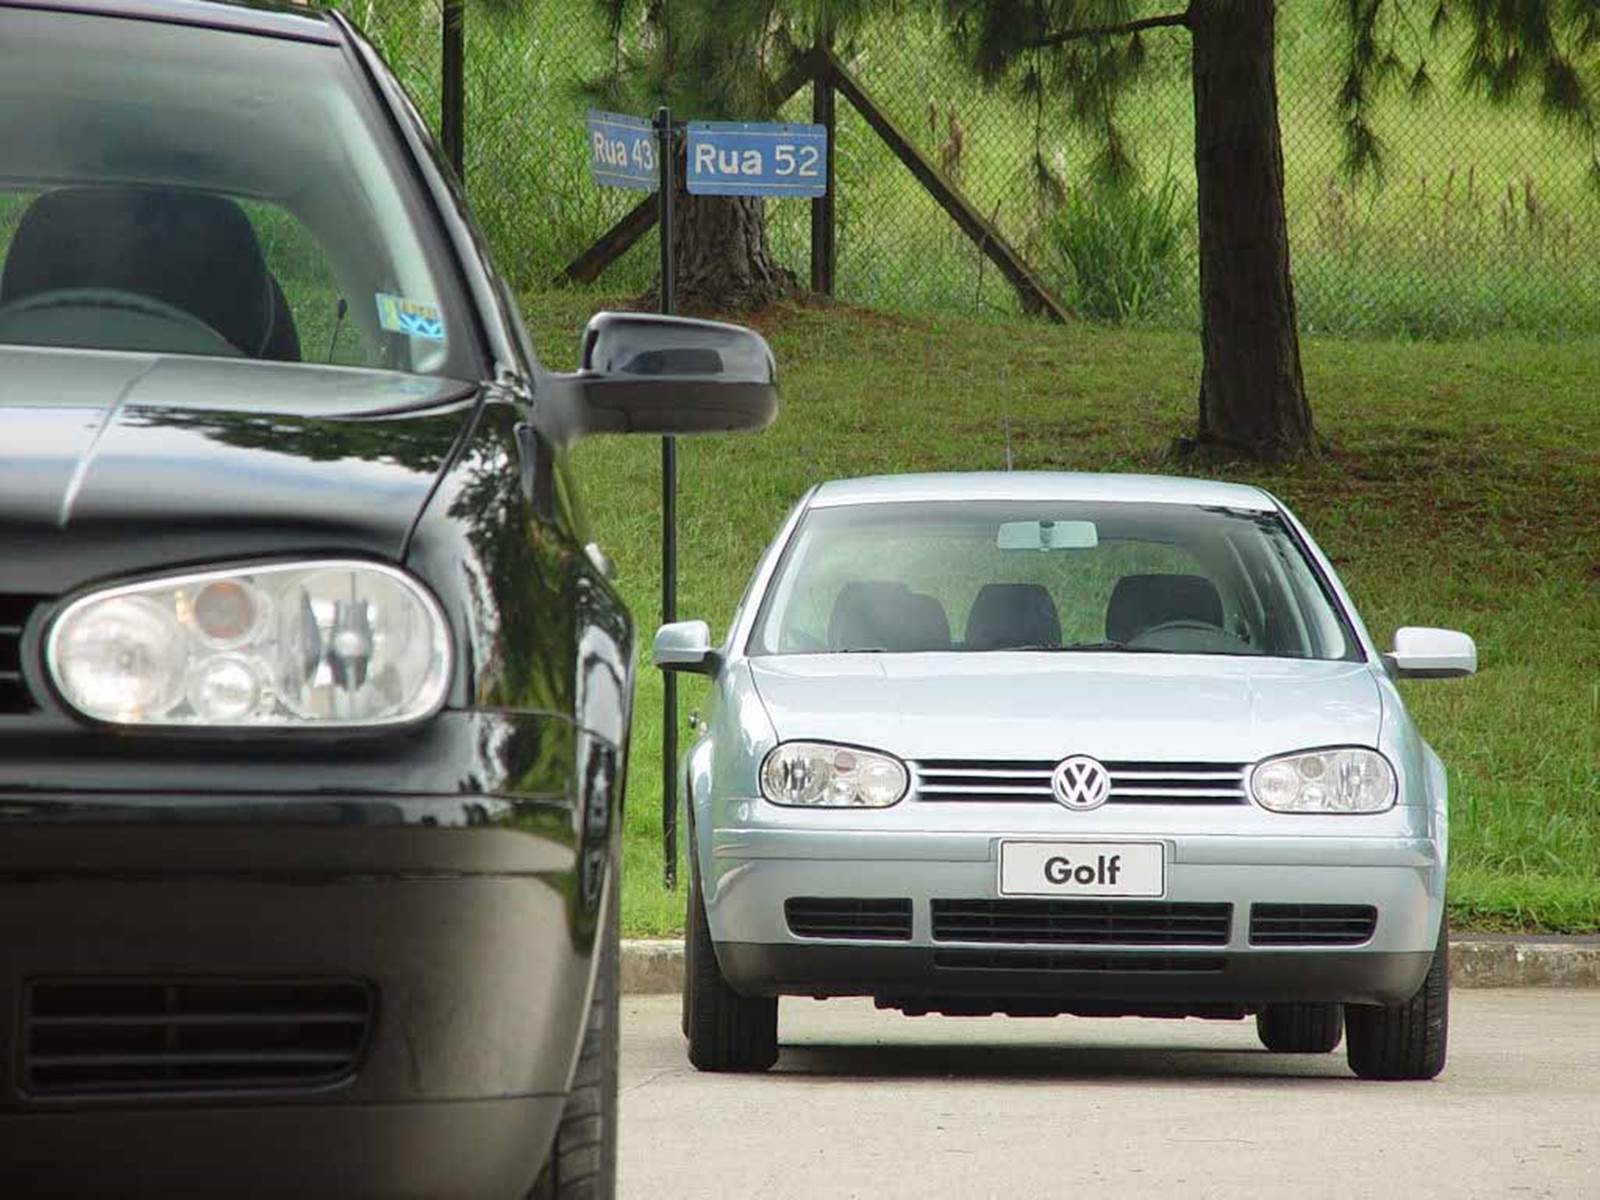 VW Golf 2002 Black and Silver